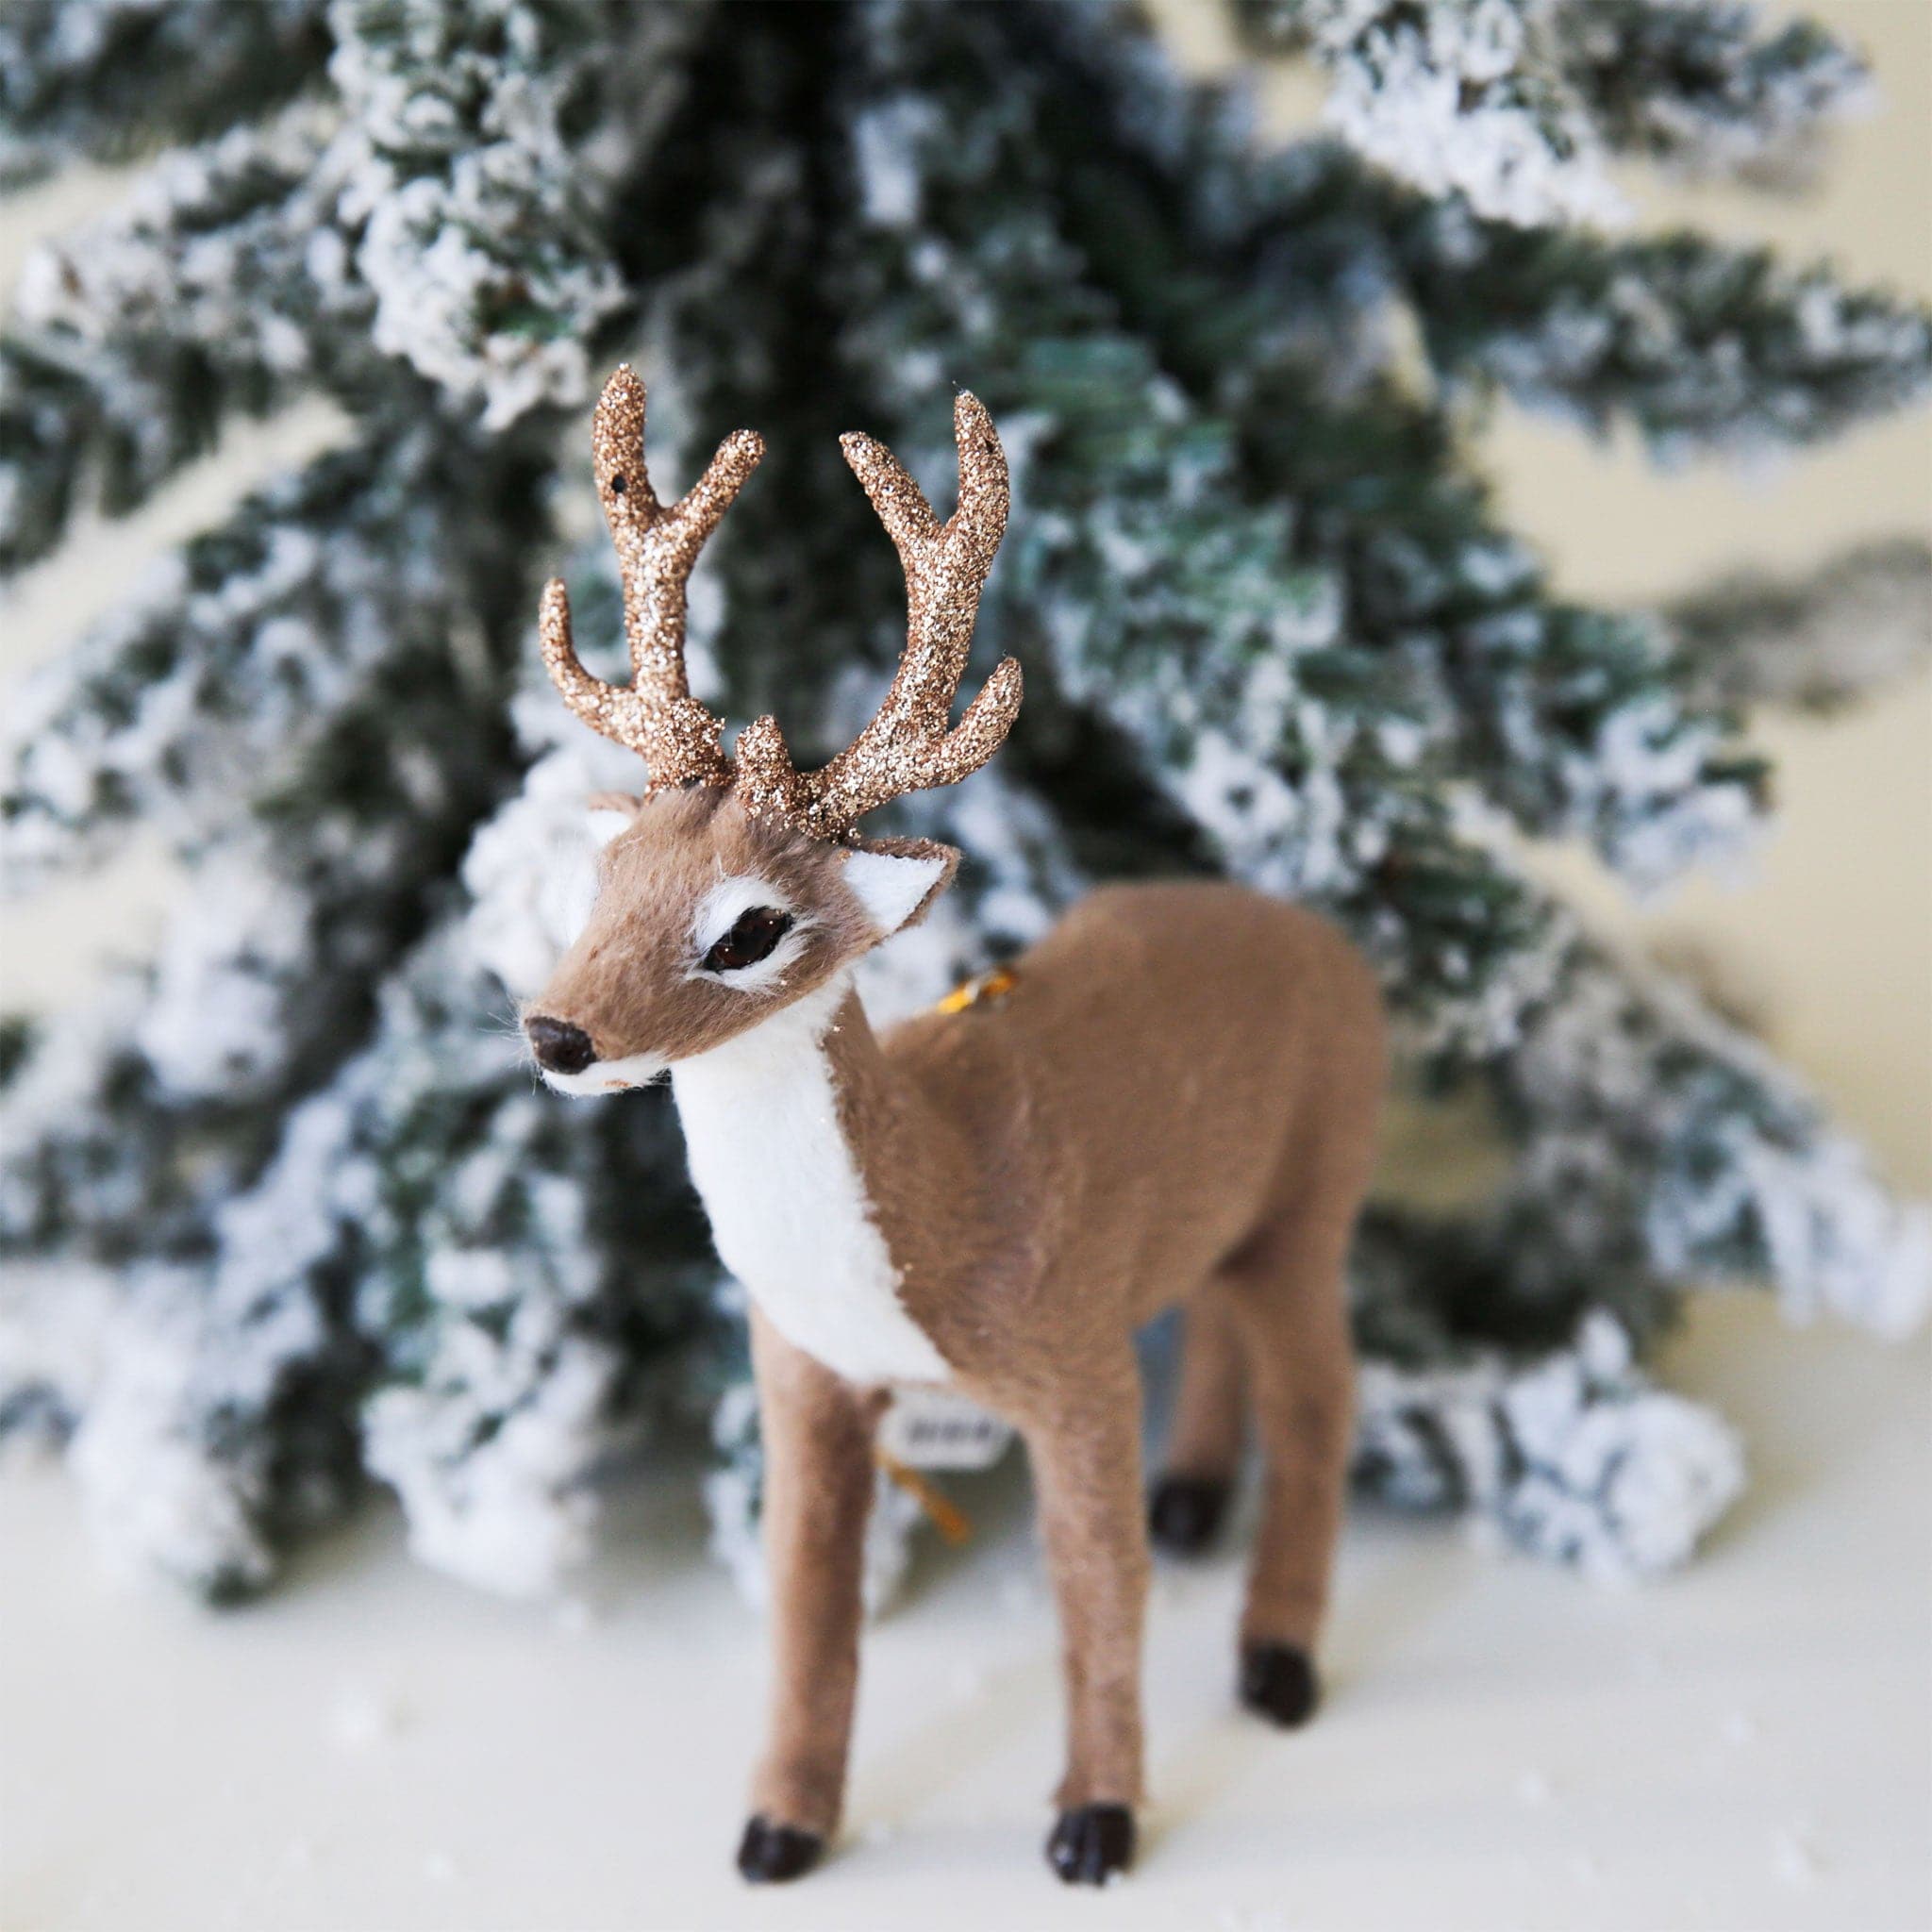 A furry white and brown stag holiday decor with glitter antlers.